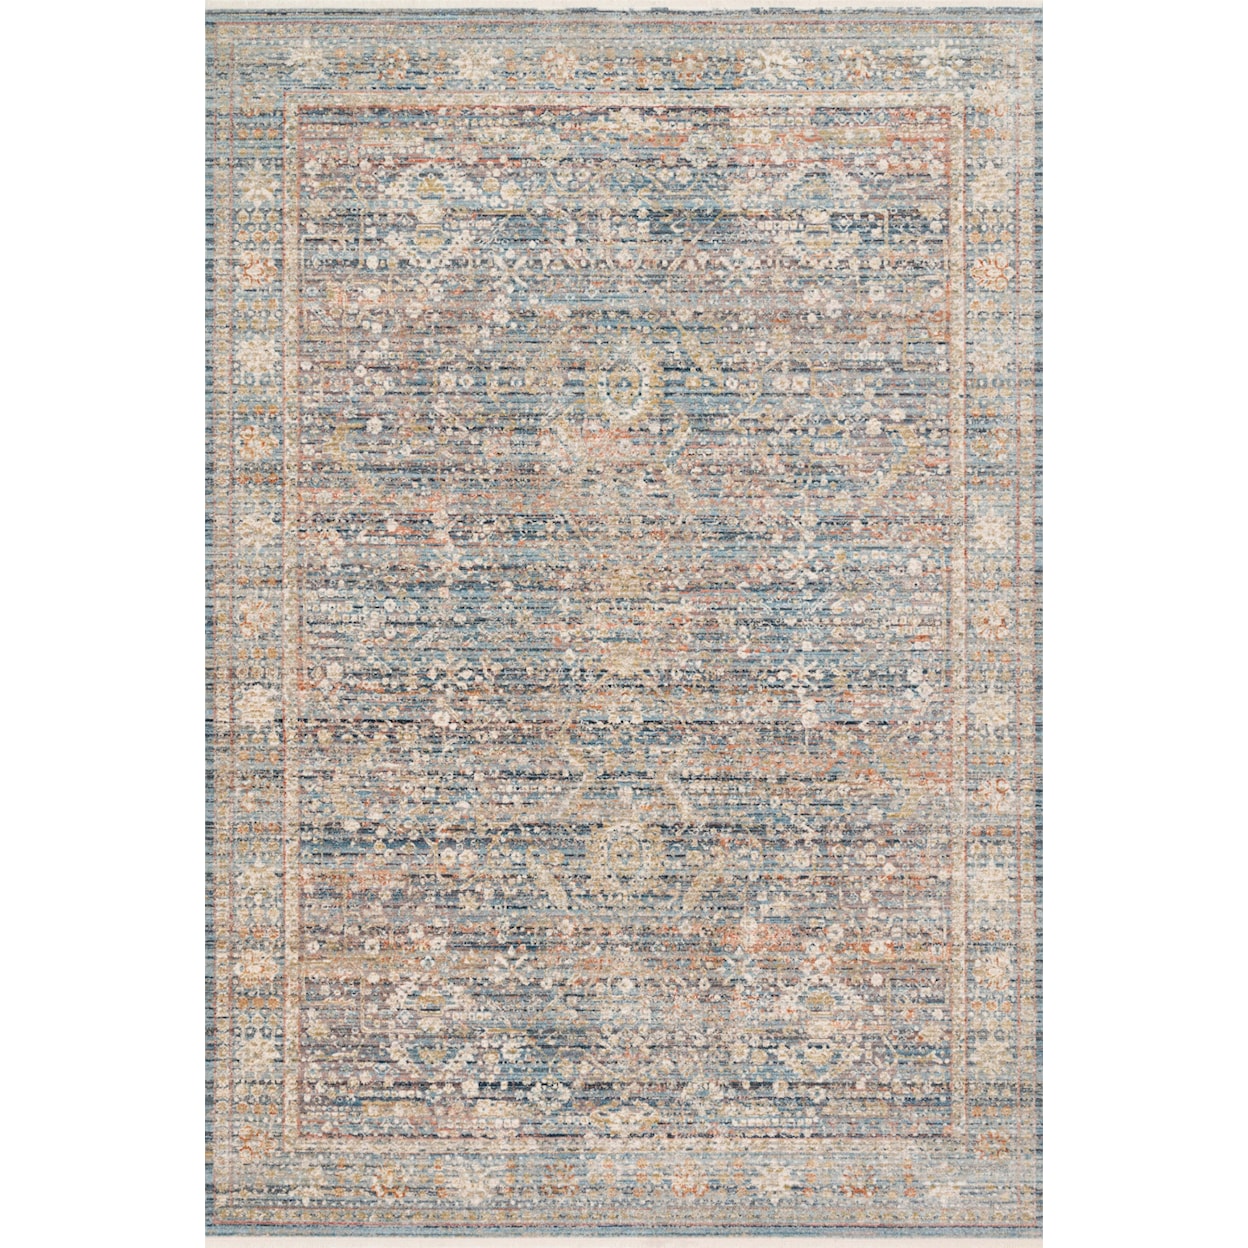 Loloi Rugs Claire 3'7" x 5'1" Blue / Sunset Rug